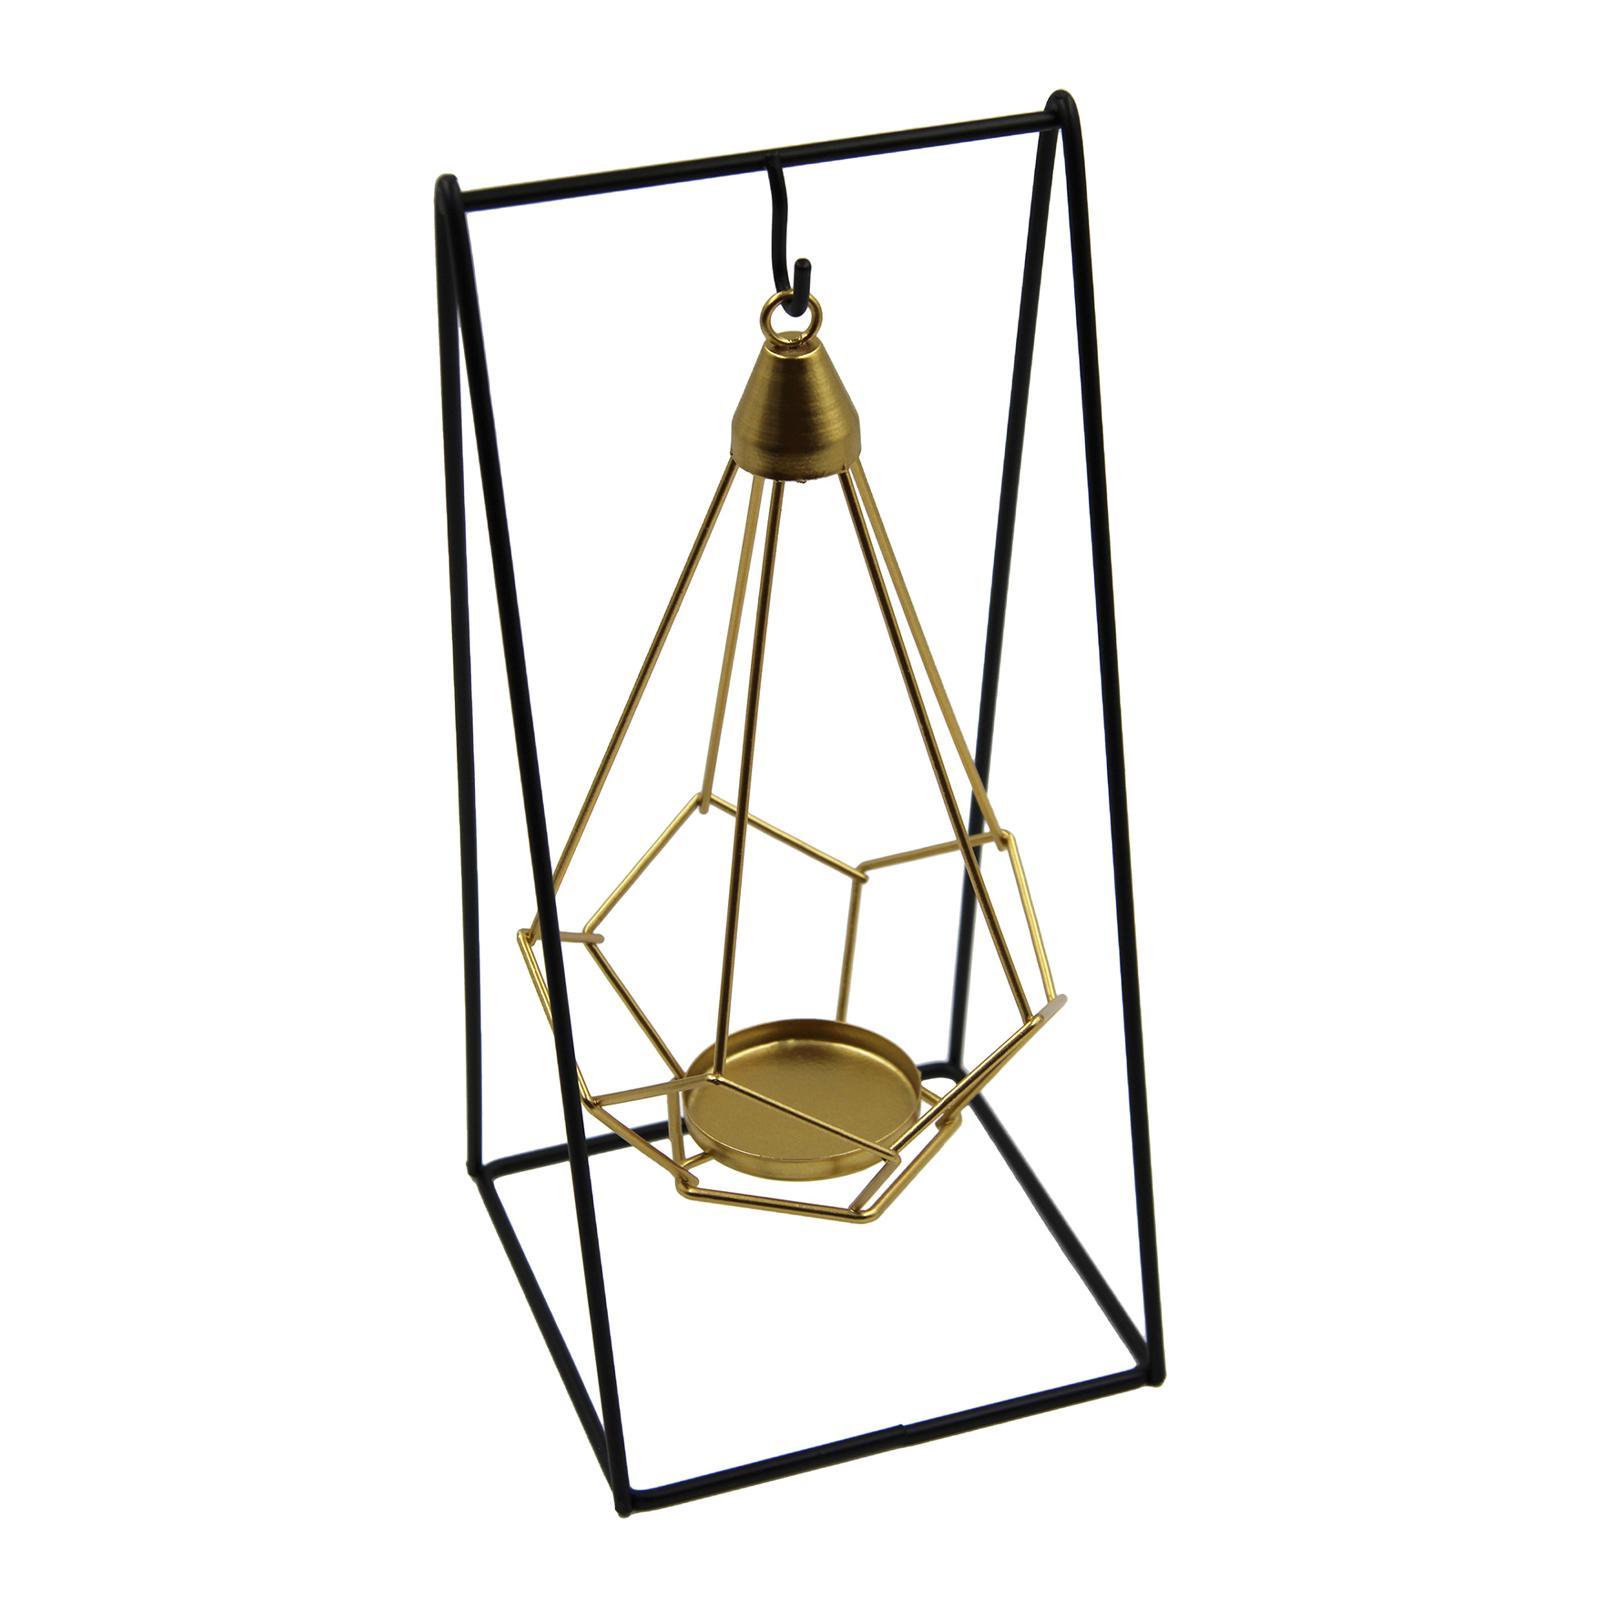 Candlestick Tealight Geometric Hanging Decoration for Home Farmhouse Parties